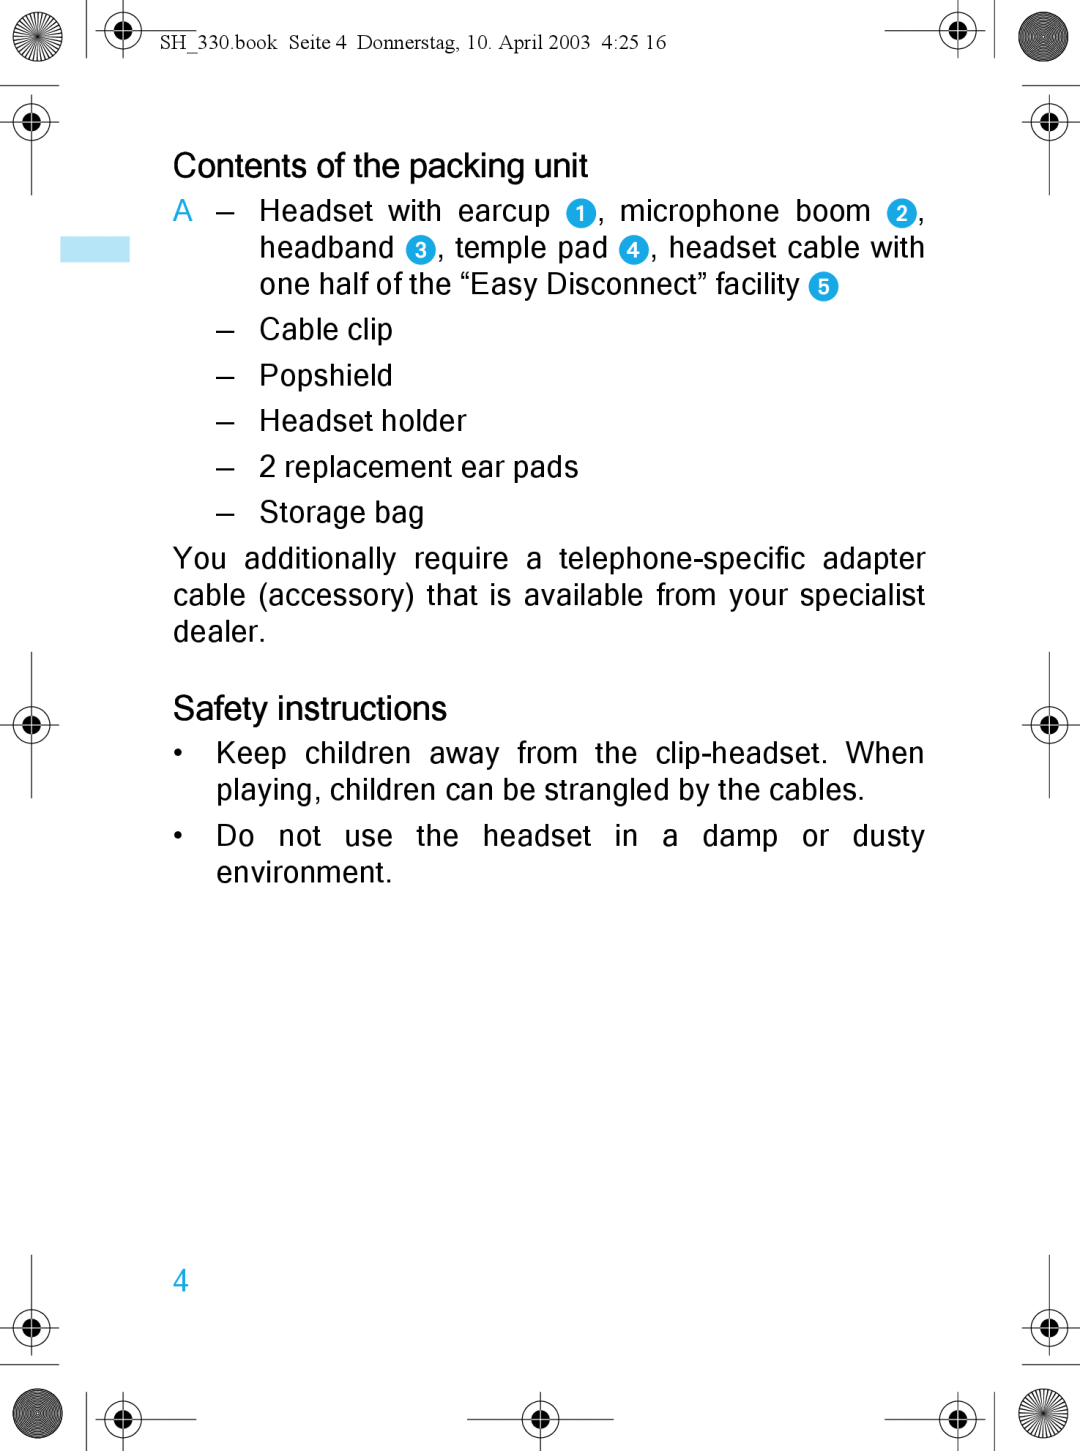 Sennheiser SH 330 manual Contents of the packing unit, Safety instructions 